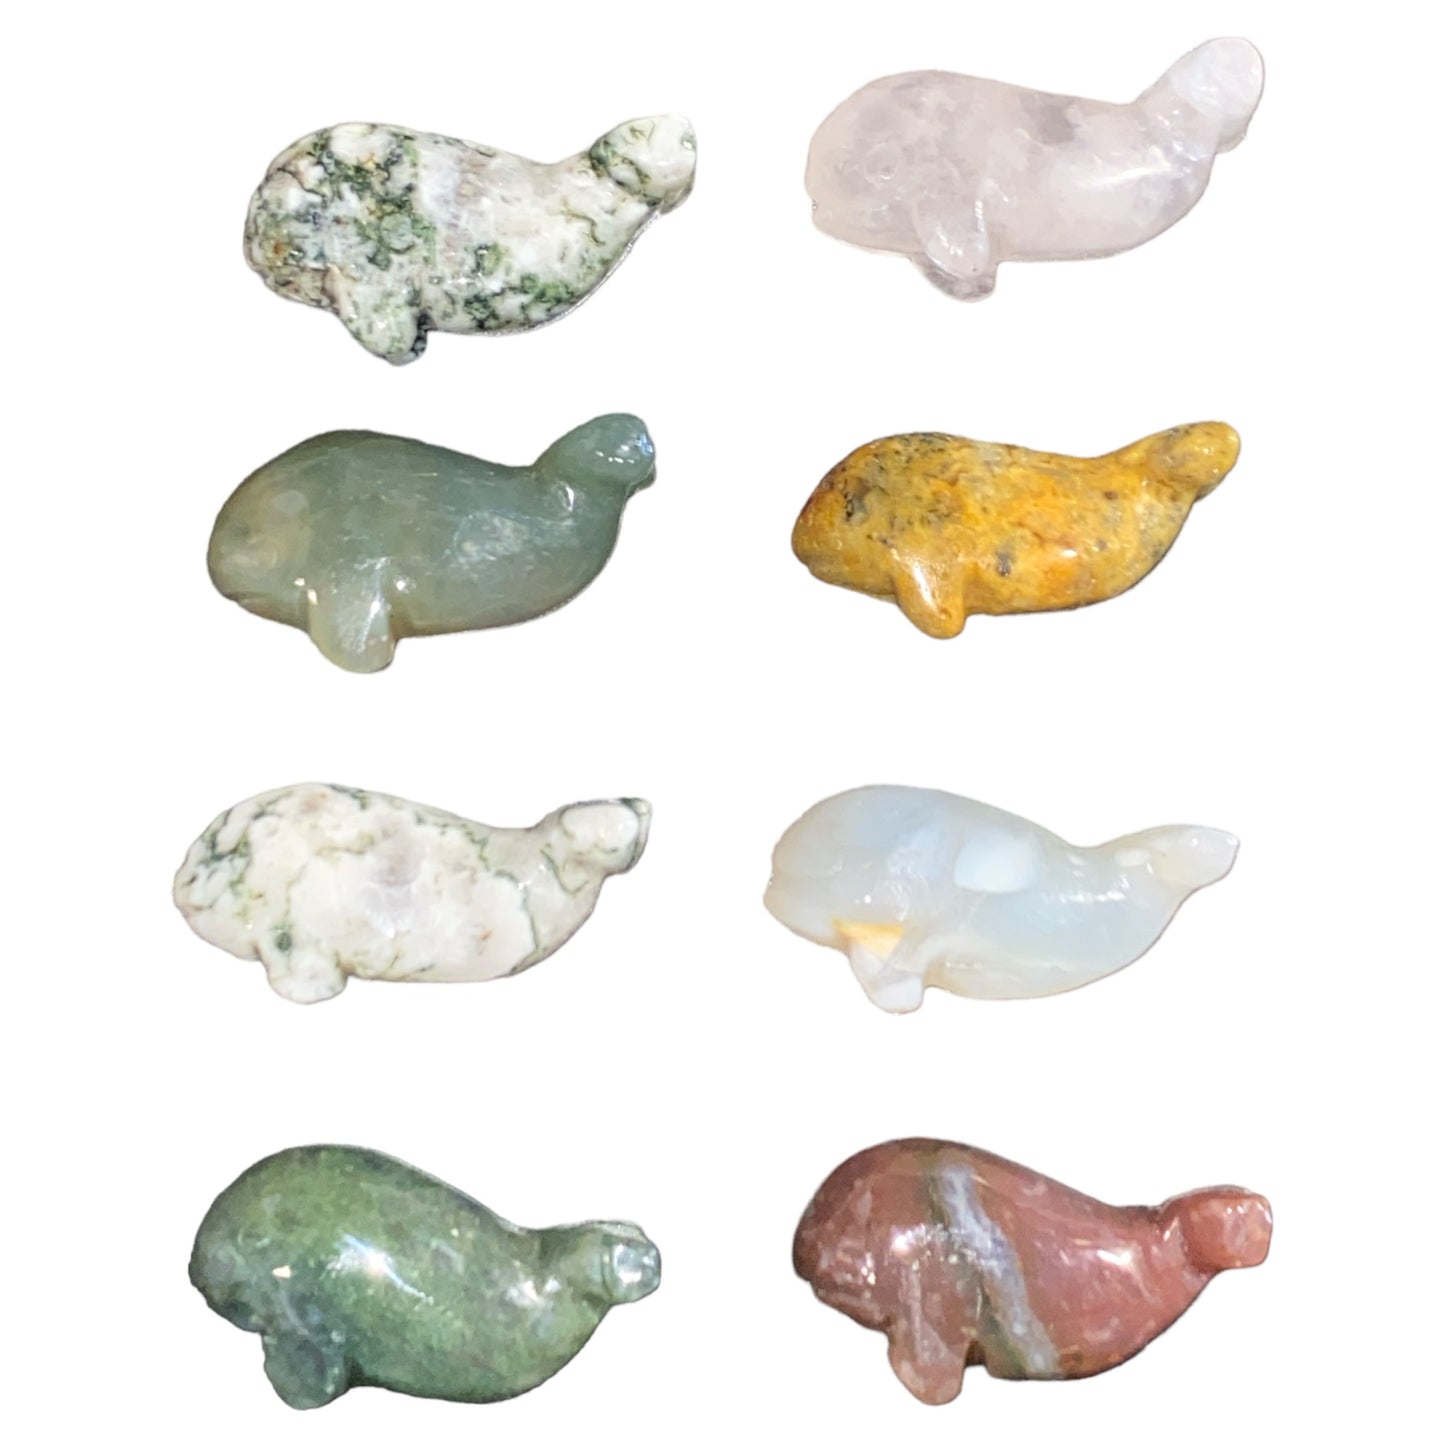 Mini Whales - Mixed Stones - 25mm - Price Each - China - NEW323